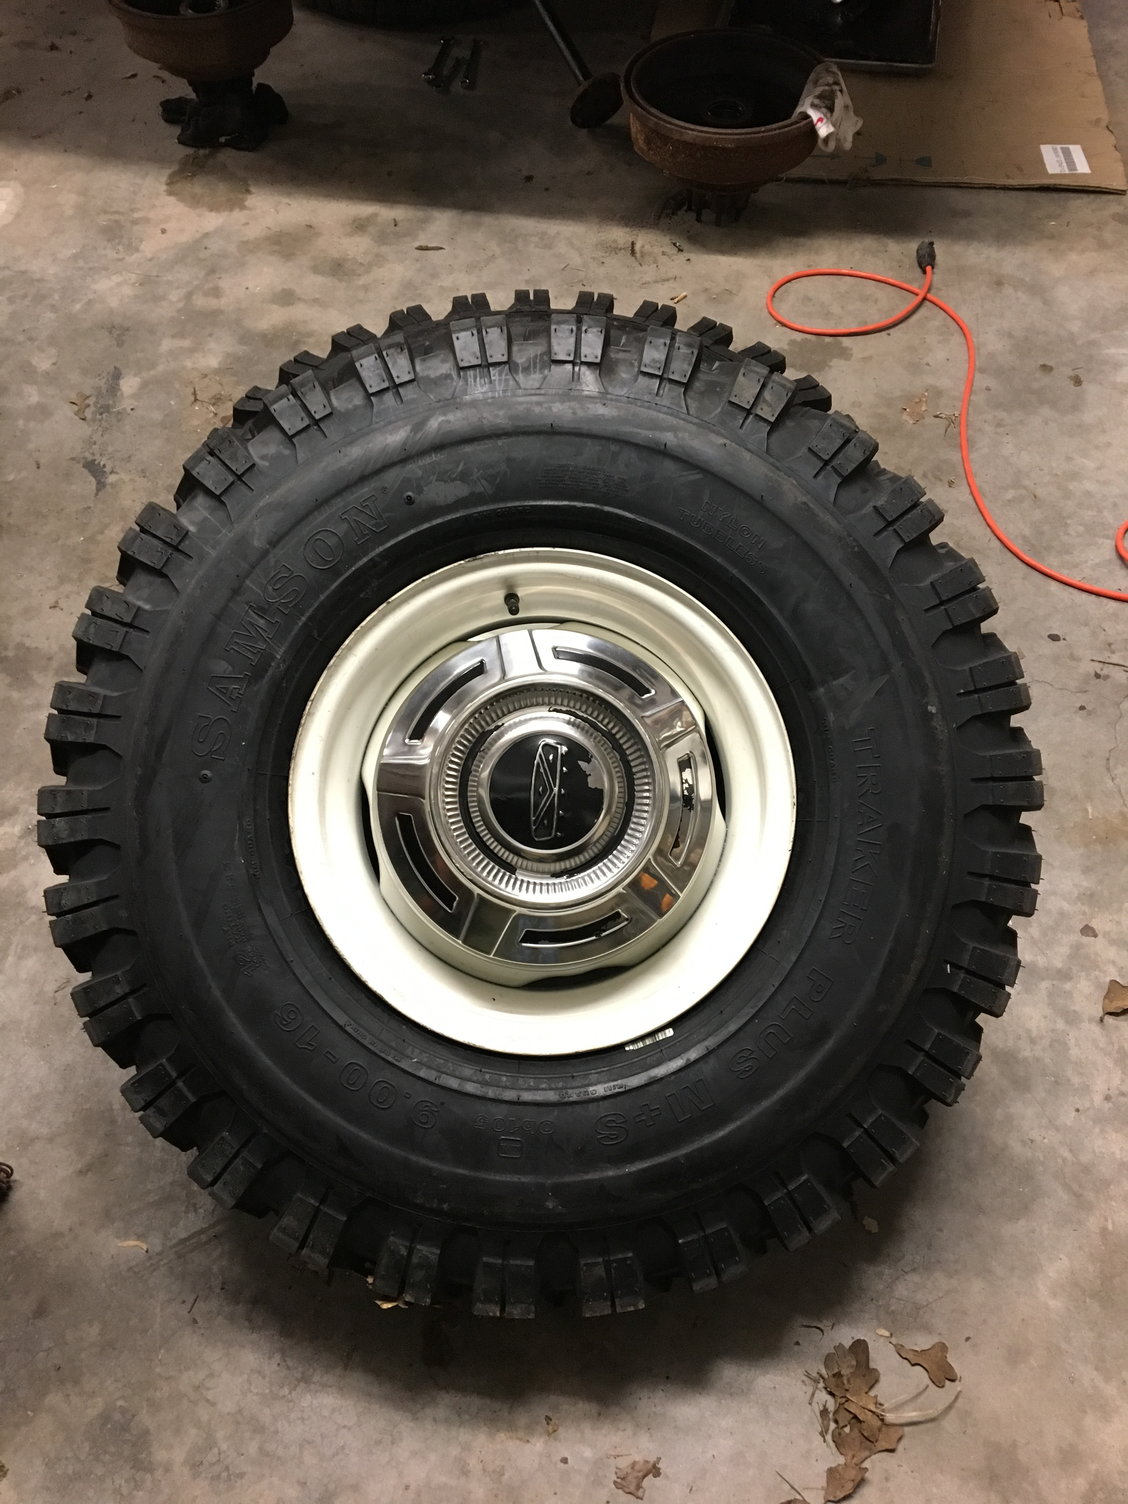 Wheels and Tires/Axles - 4 factory original Dog Dish hubcaps in excellent condition, came of my 1969 3/4 ton truck. - Used - 1967 to 1972 Ford 3/4 Ton Pickup - Hill Country, TX 78654, United States